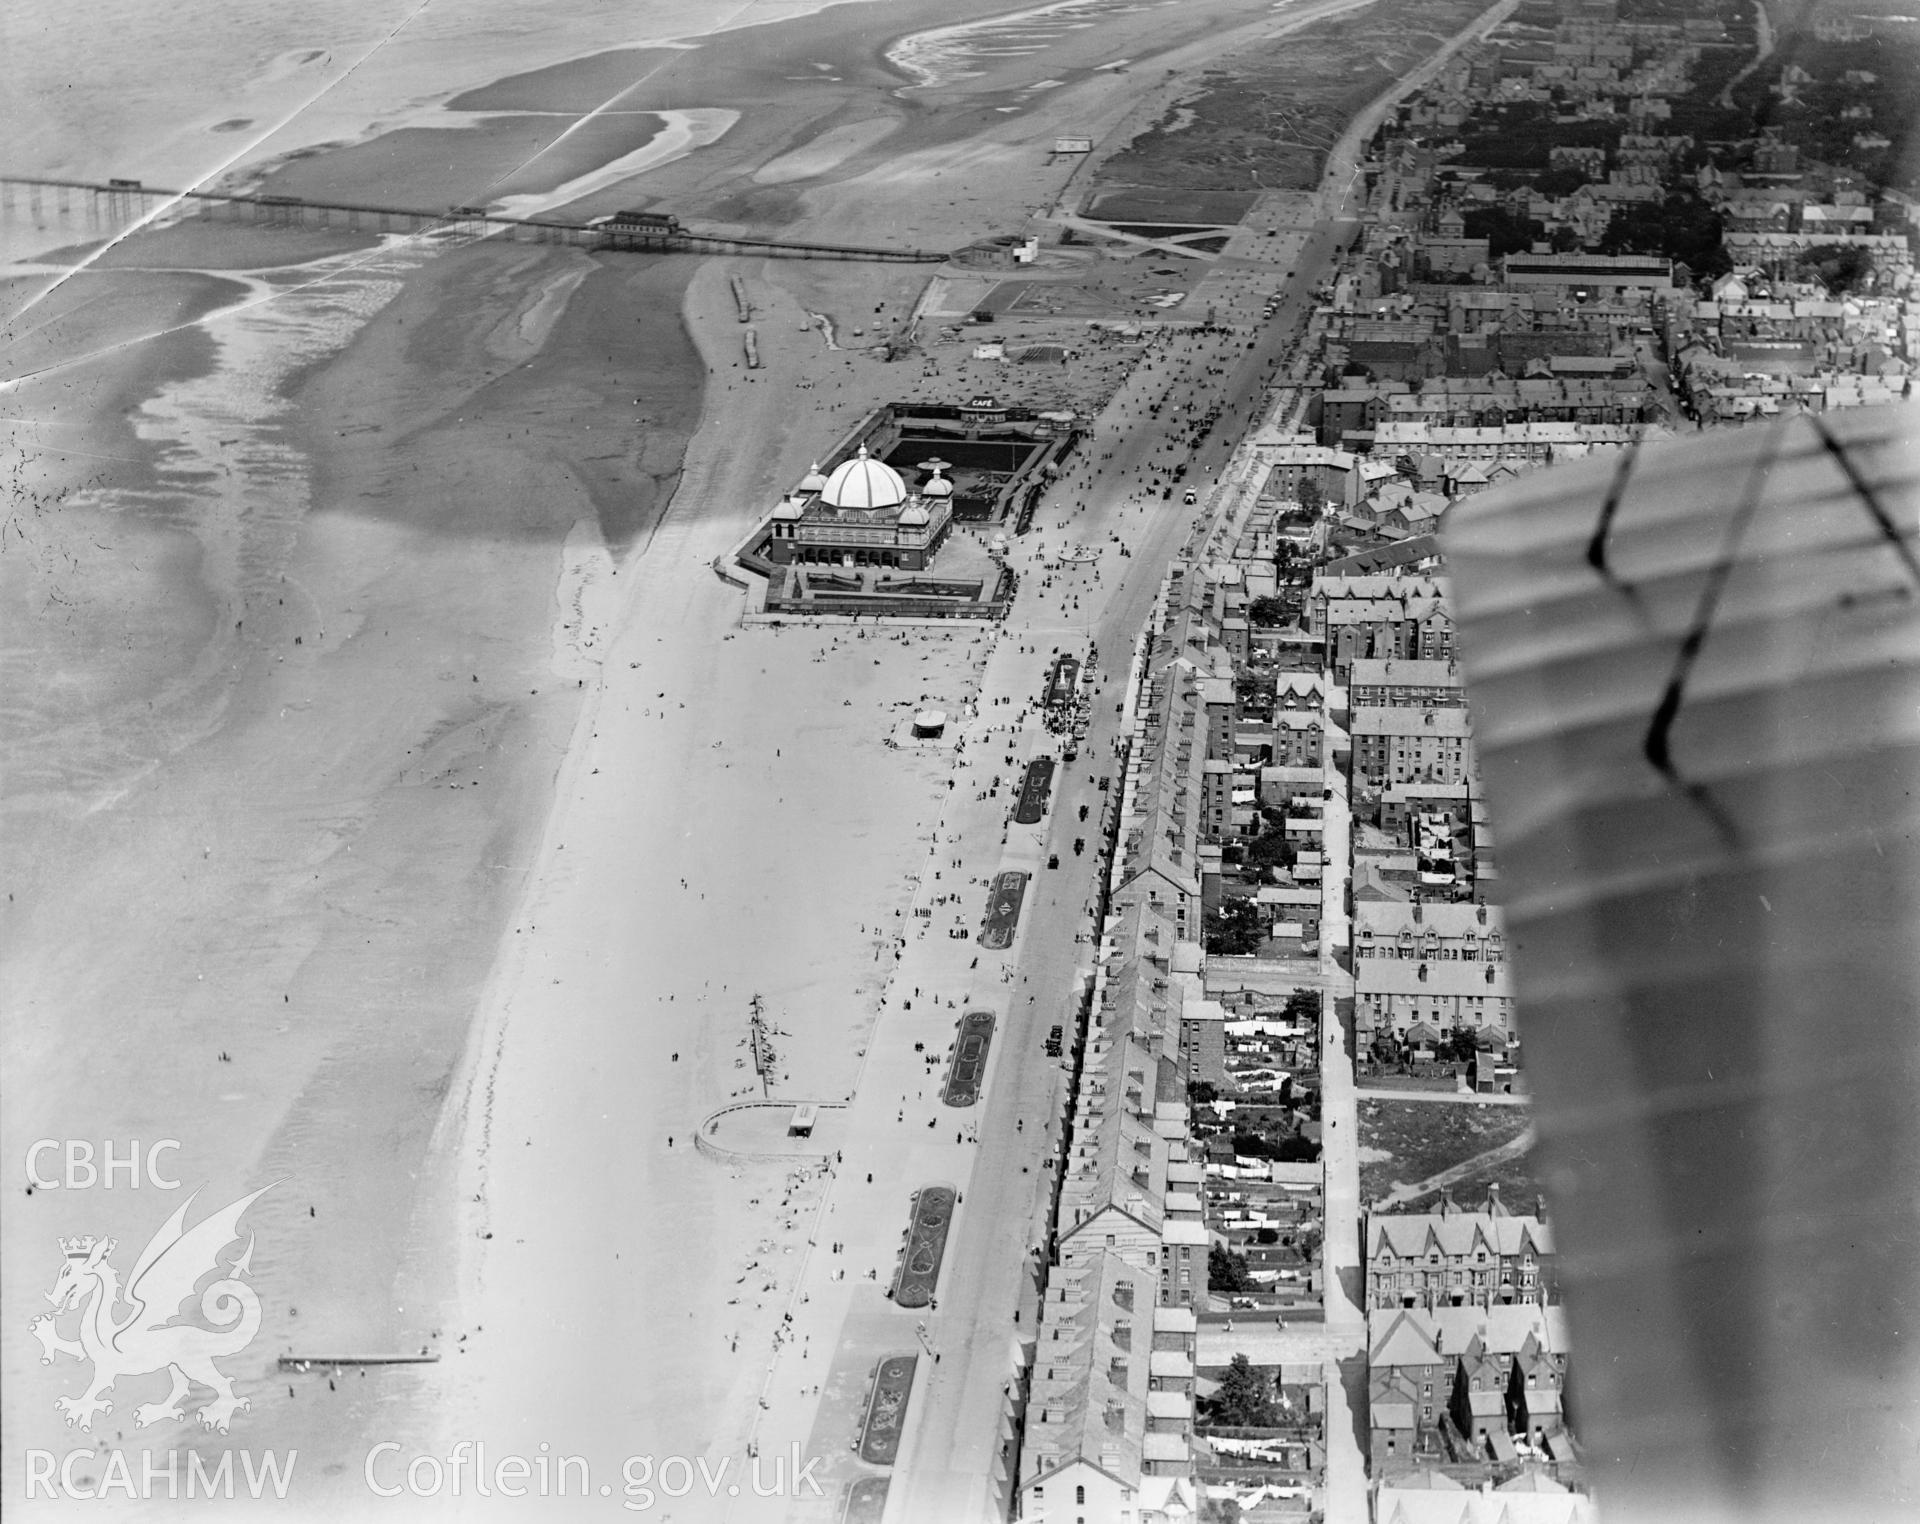 View of Rhyl showing the new pavillion and bandstand complex, oblique aerial view. 5?x4? black and white glass plate negative.